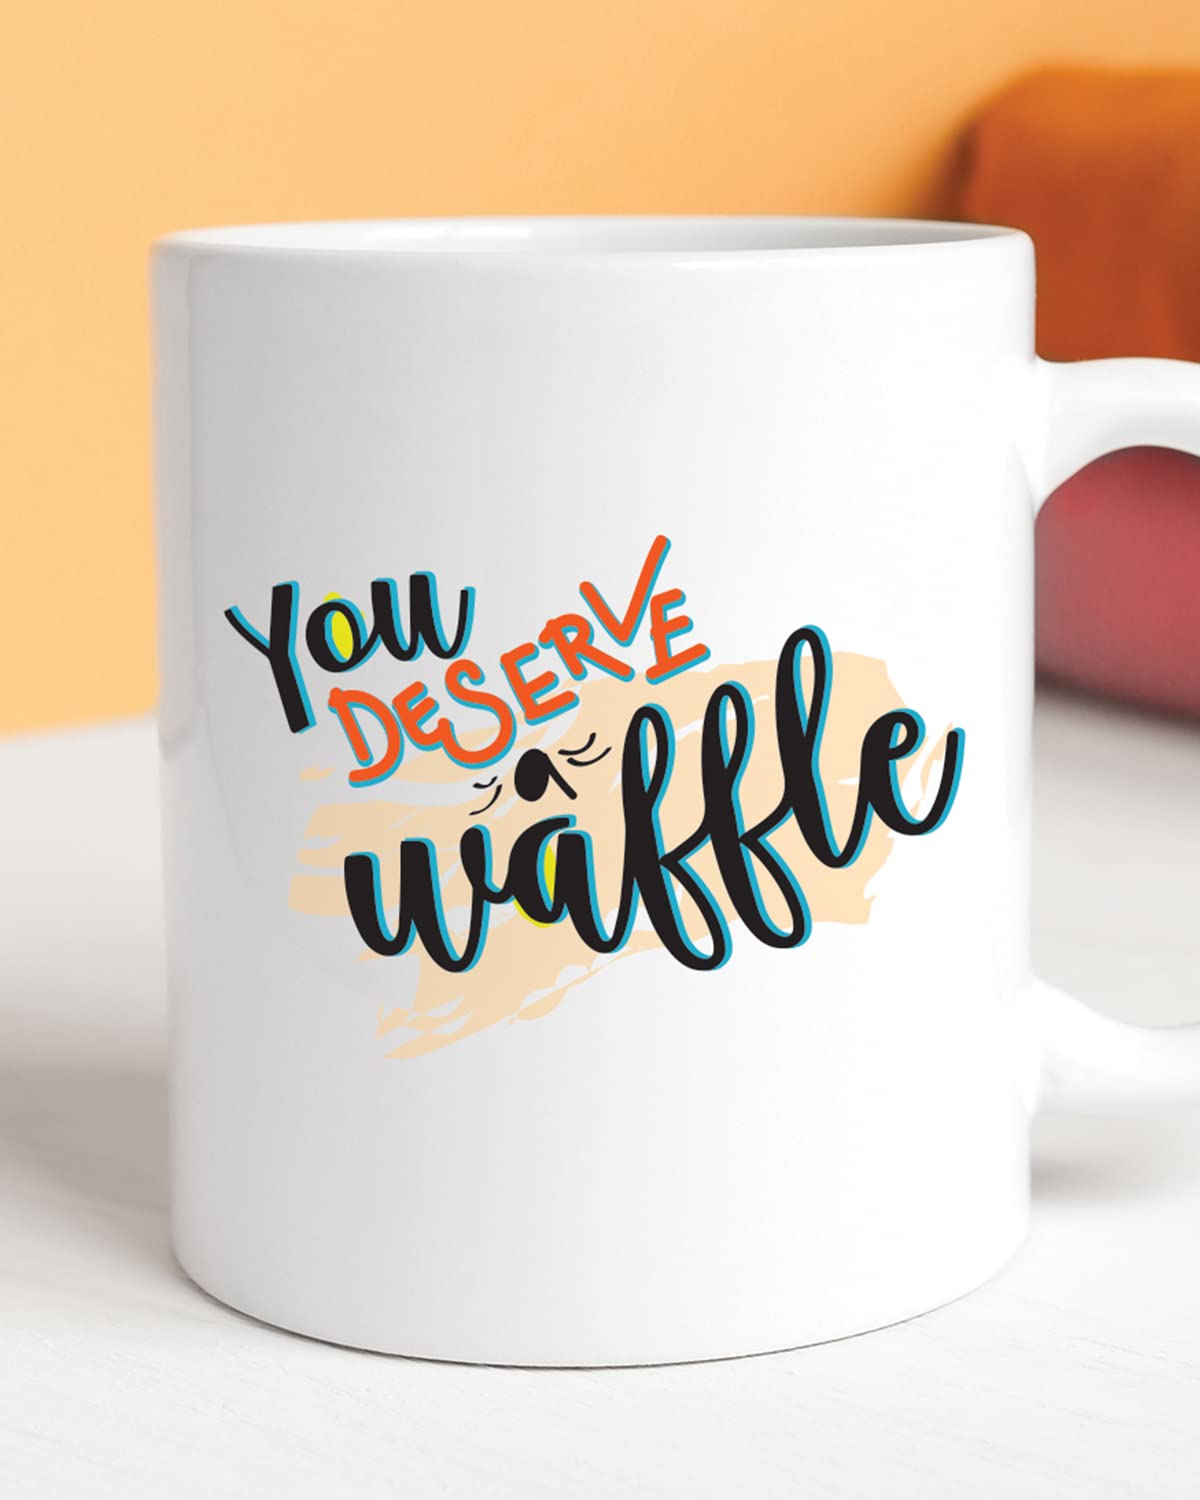 You Deserve A Waffle Coffee Mug - Birthday Gift, Motivational Mug, Printed with Inspiring Quotes, Positivity Mug, Inspirational Gift for Him & Her, Best Friend Gift, Gifts for Her, Cheer Up Gift